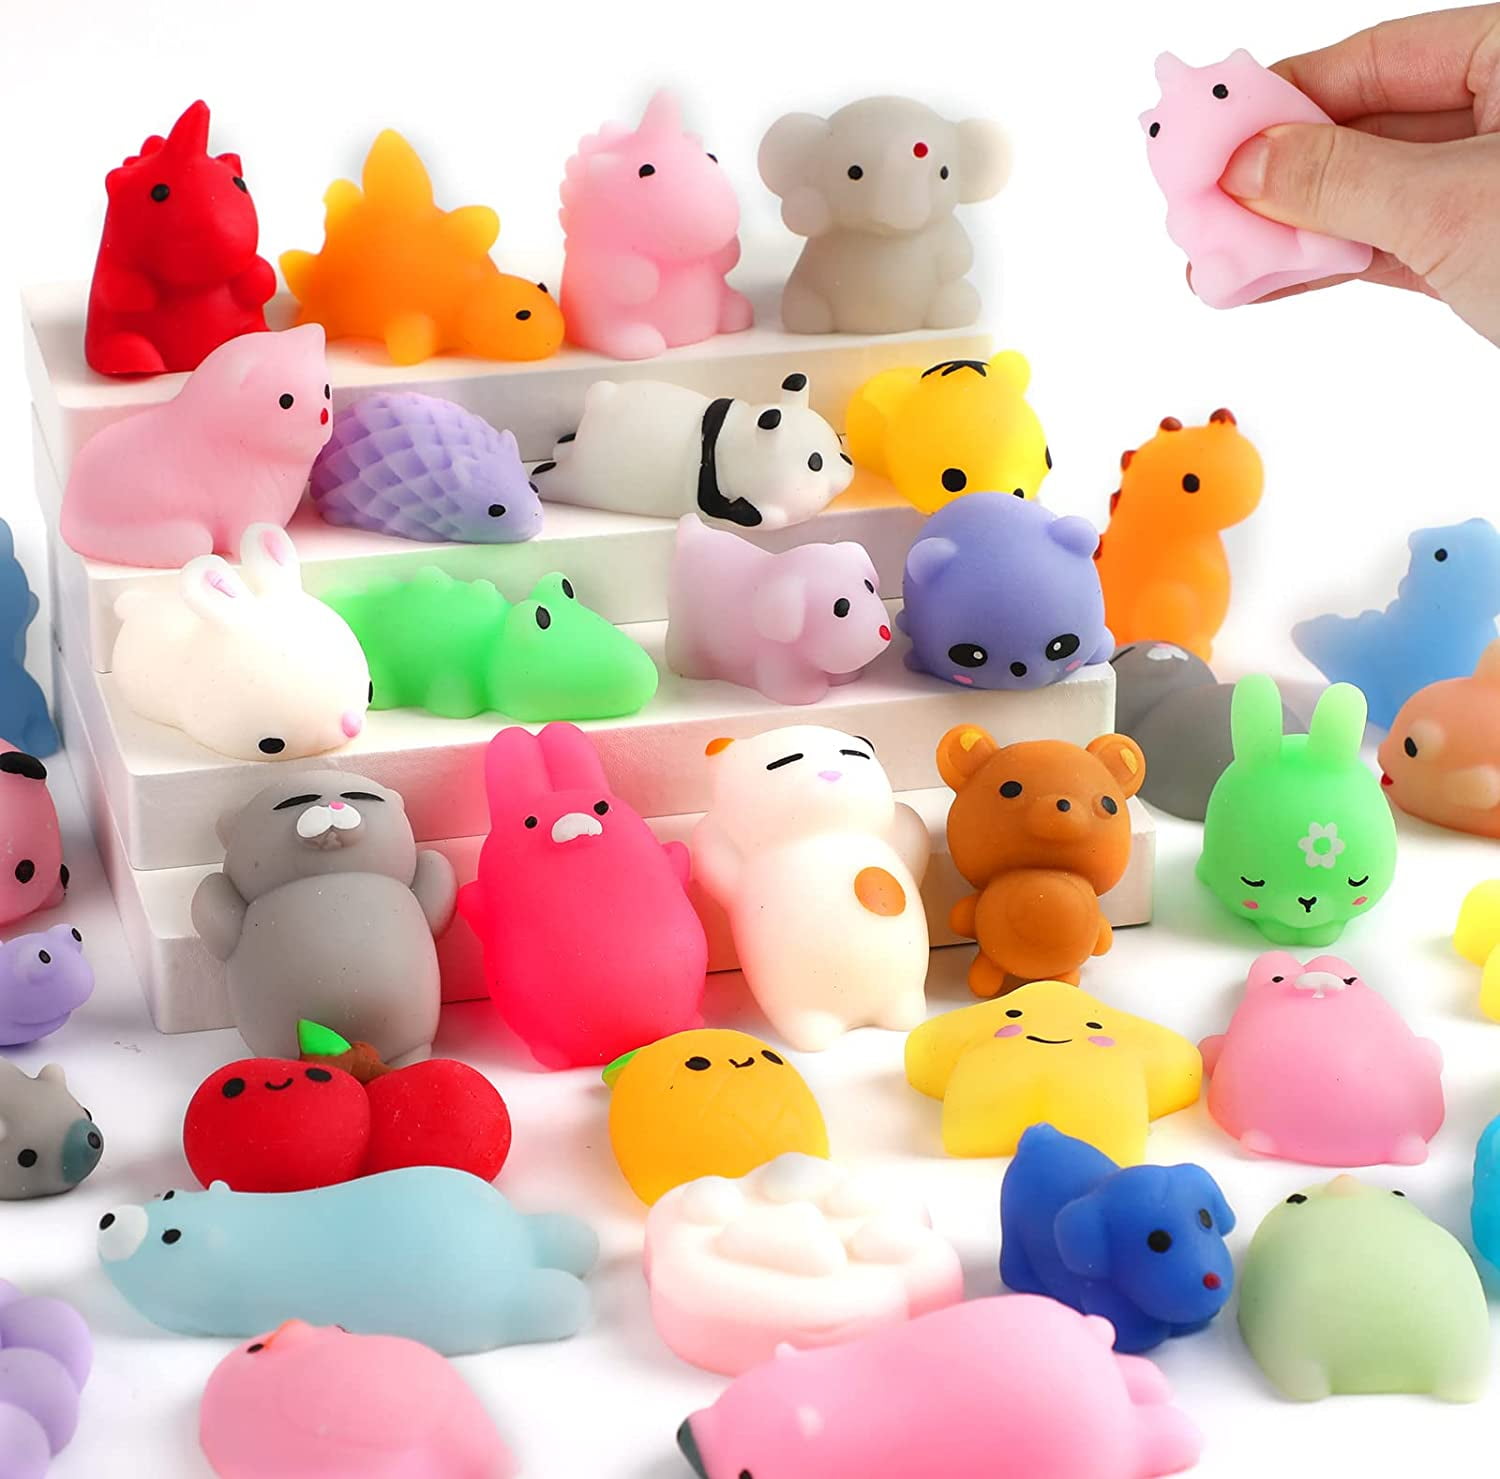  JOYIN 24 PCS Valentine's Day Squishy Toy Bear Toys with Card,  Squeeze Stretchy Stress Relief & for Valentine's Classroom Exchange,  Valentine's Party Favors, Fidget Toys for Boys and Girls : Toys